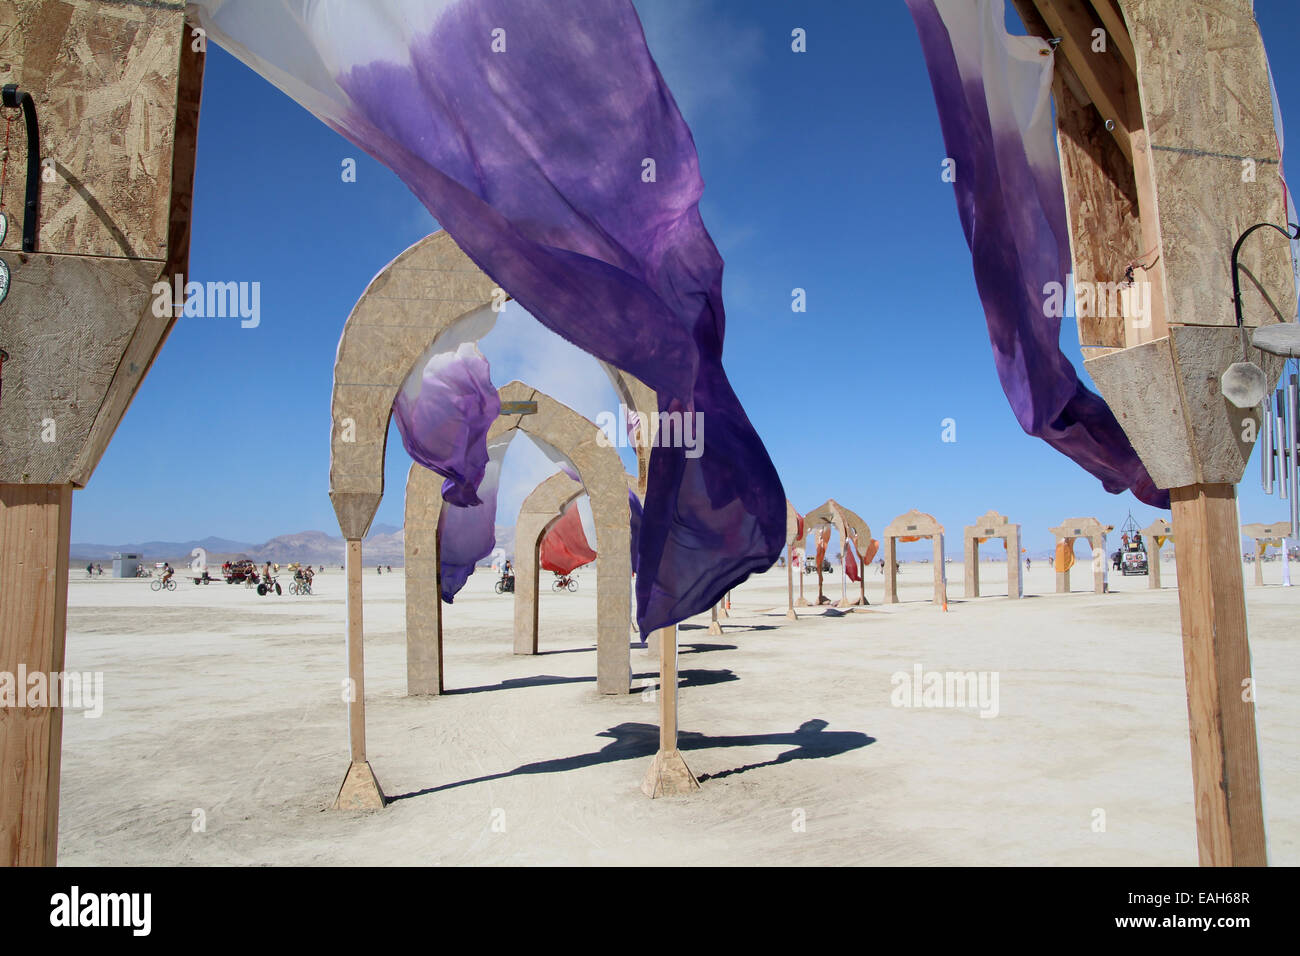 An art installation on the playa at the annual Burning Man festival in the desert August 27, 2014 in Black Rock City, Nevada. Stock Photo